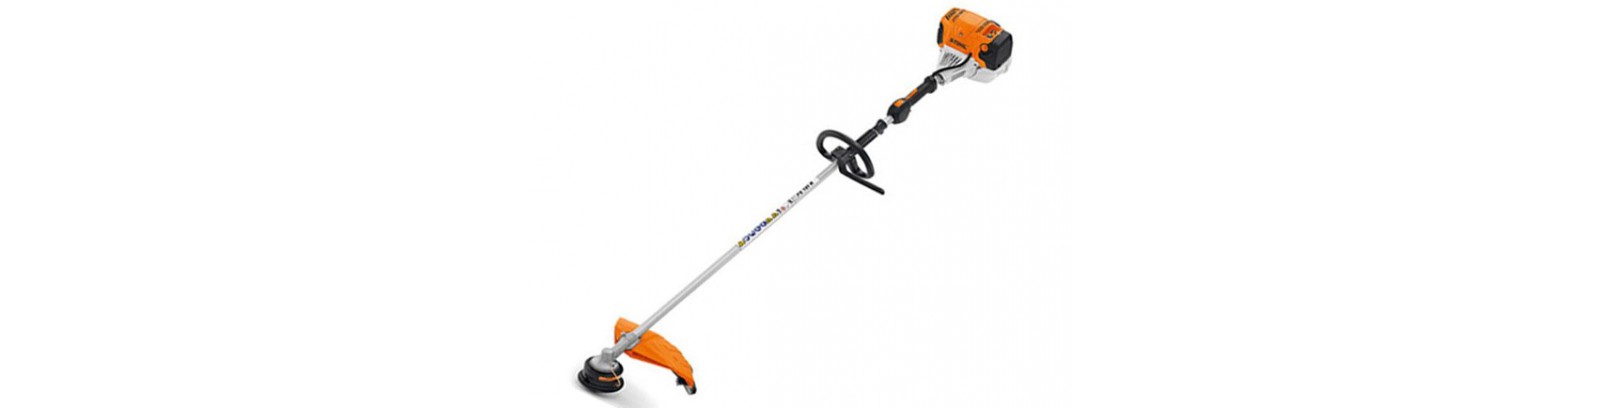 Petrol Trimmers & Brushcutters